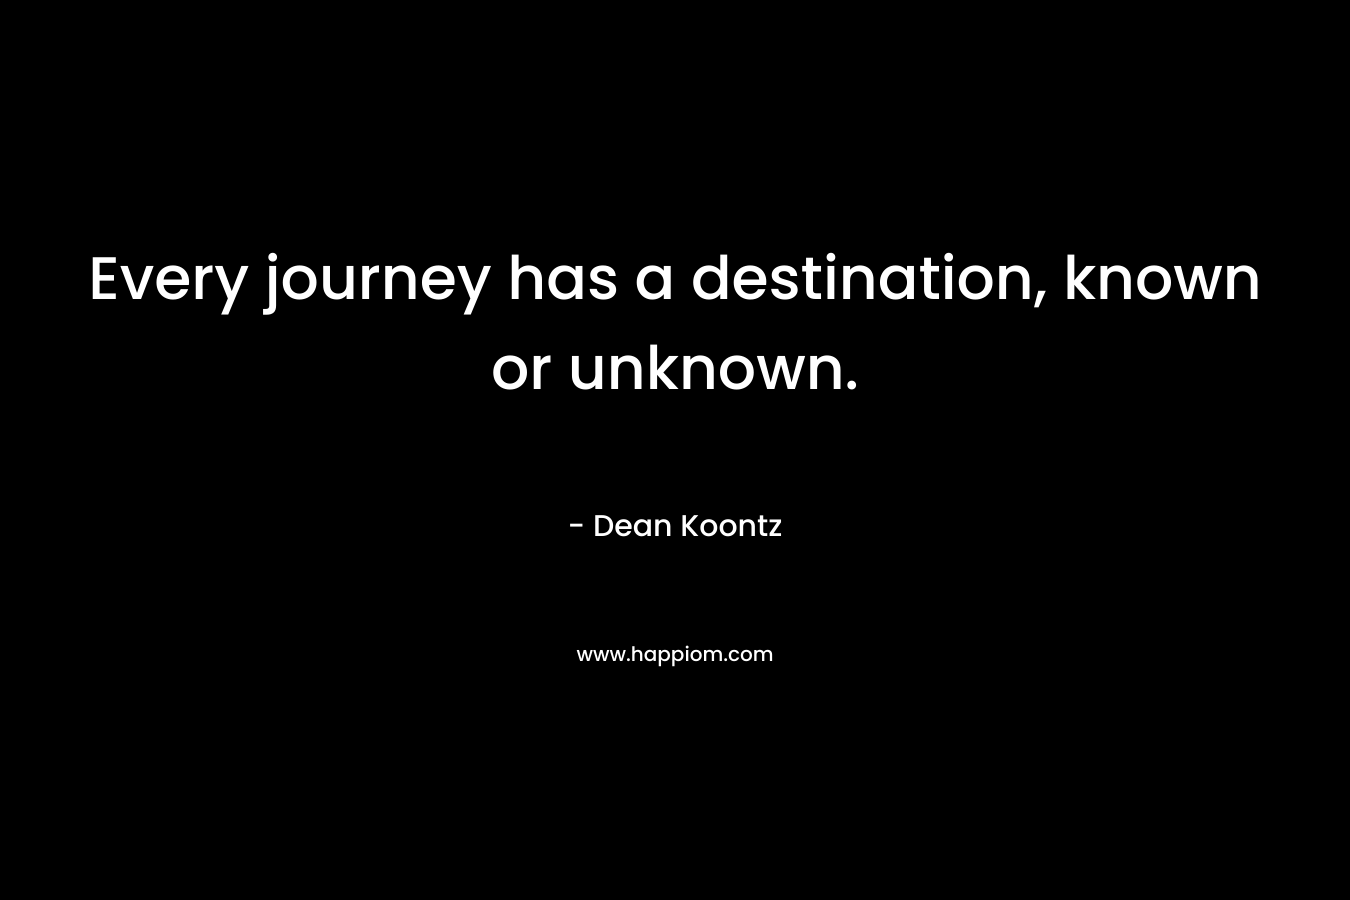 Every journey has a destination, known or unknown.